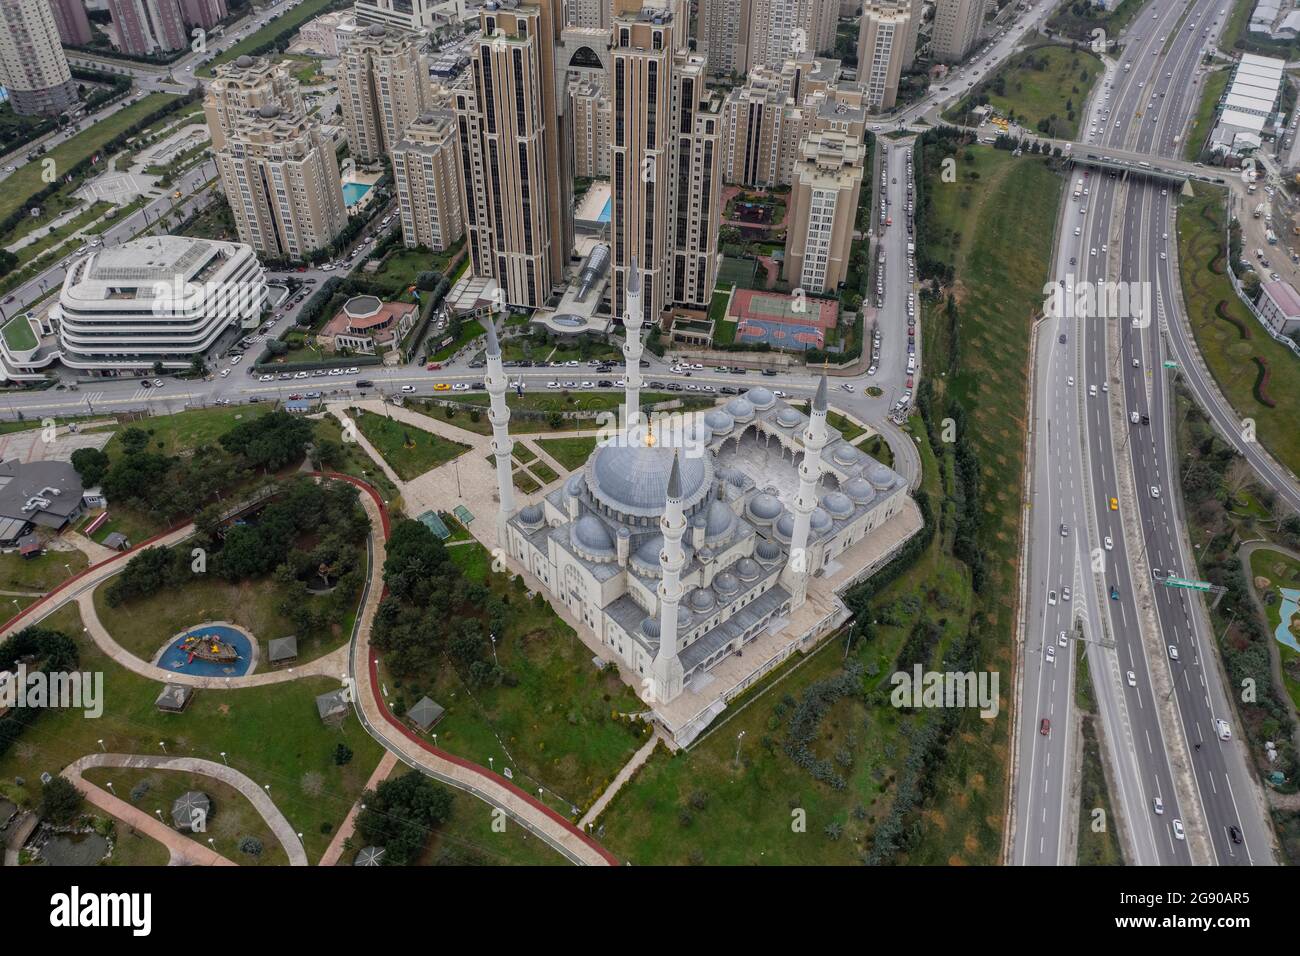 Turkey, Istanbul, Aerial view of Mimar Sinan Mosque and surrounding skyscrapers Stock Photo